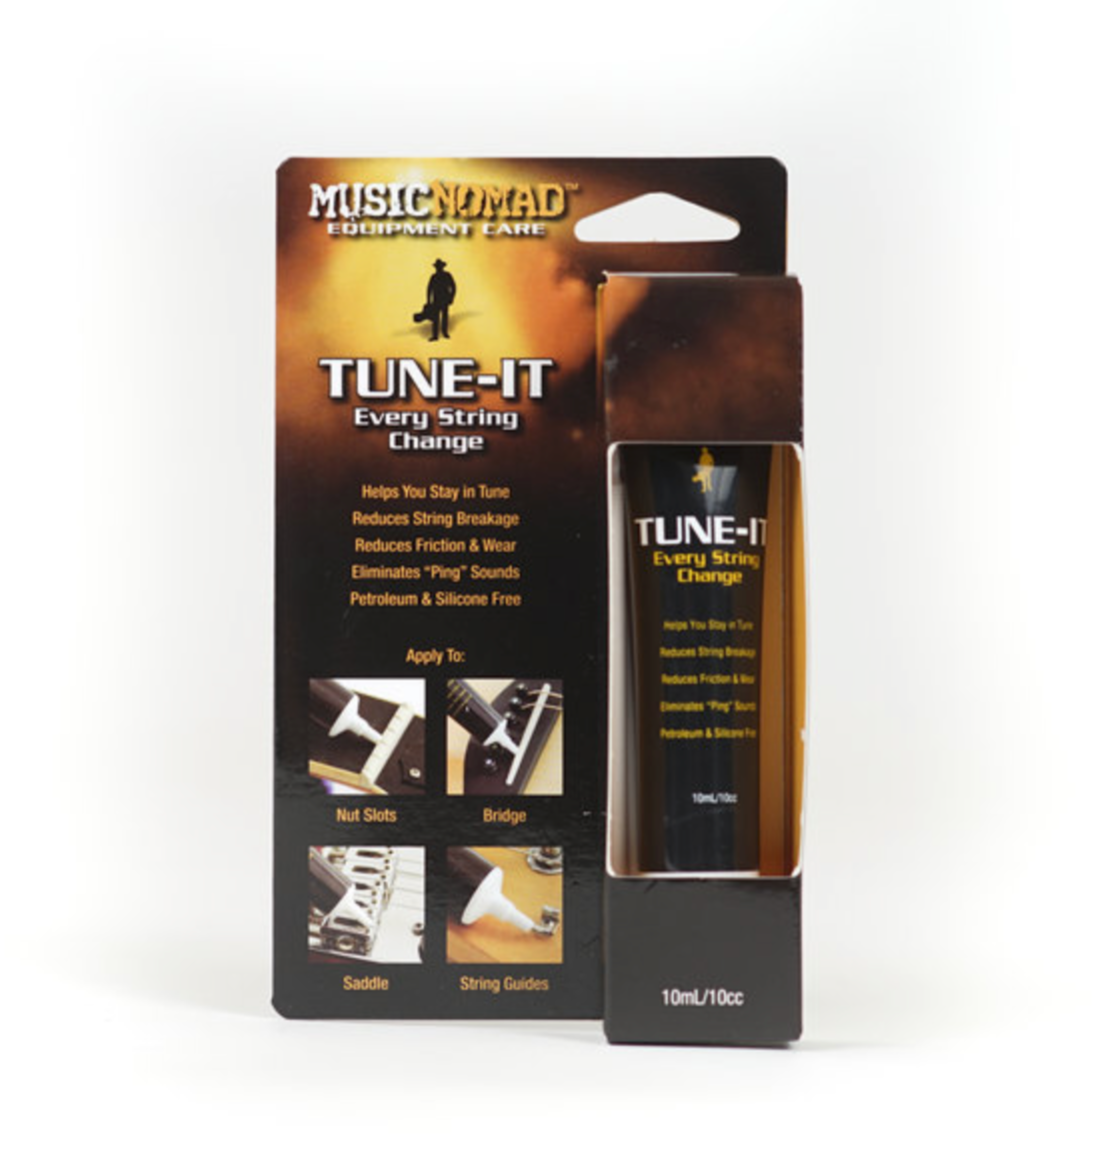 Music Nomad TUNE-IT - String Instrument Lubricant S/N: MN106